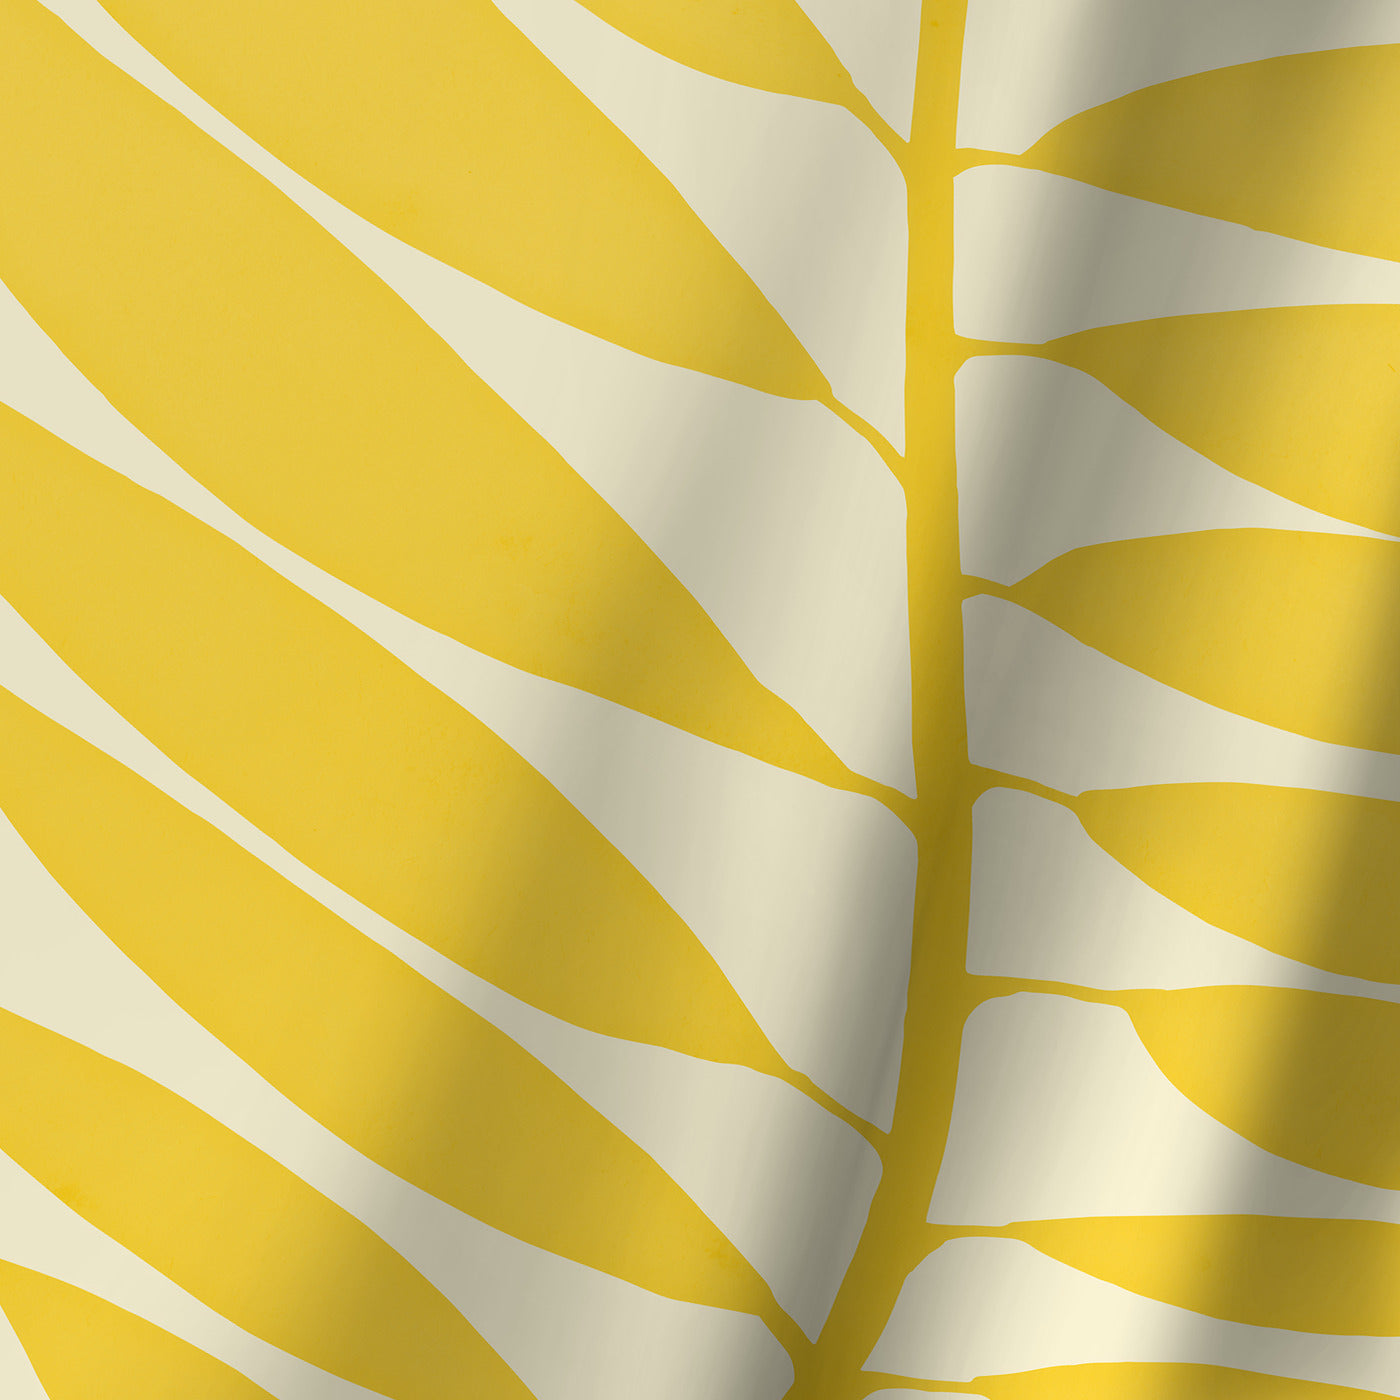 Blackout Curtain Single Panel - Golden Yellow Leaves  by Modern Tropical - Blackout Curtains - Americanflat